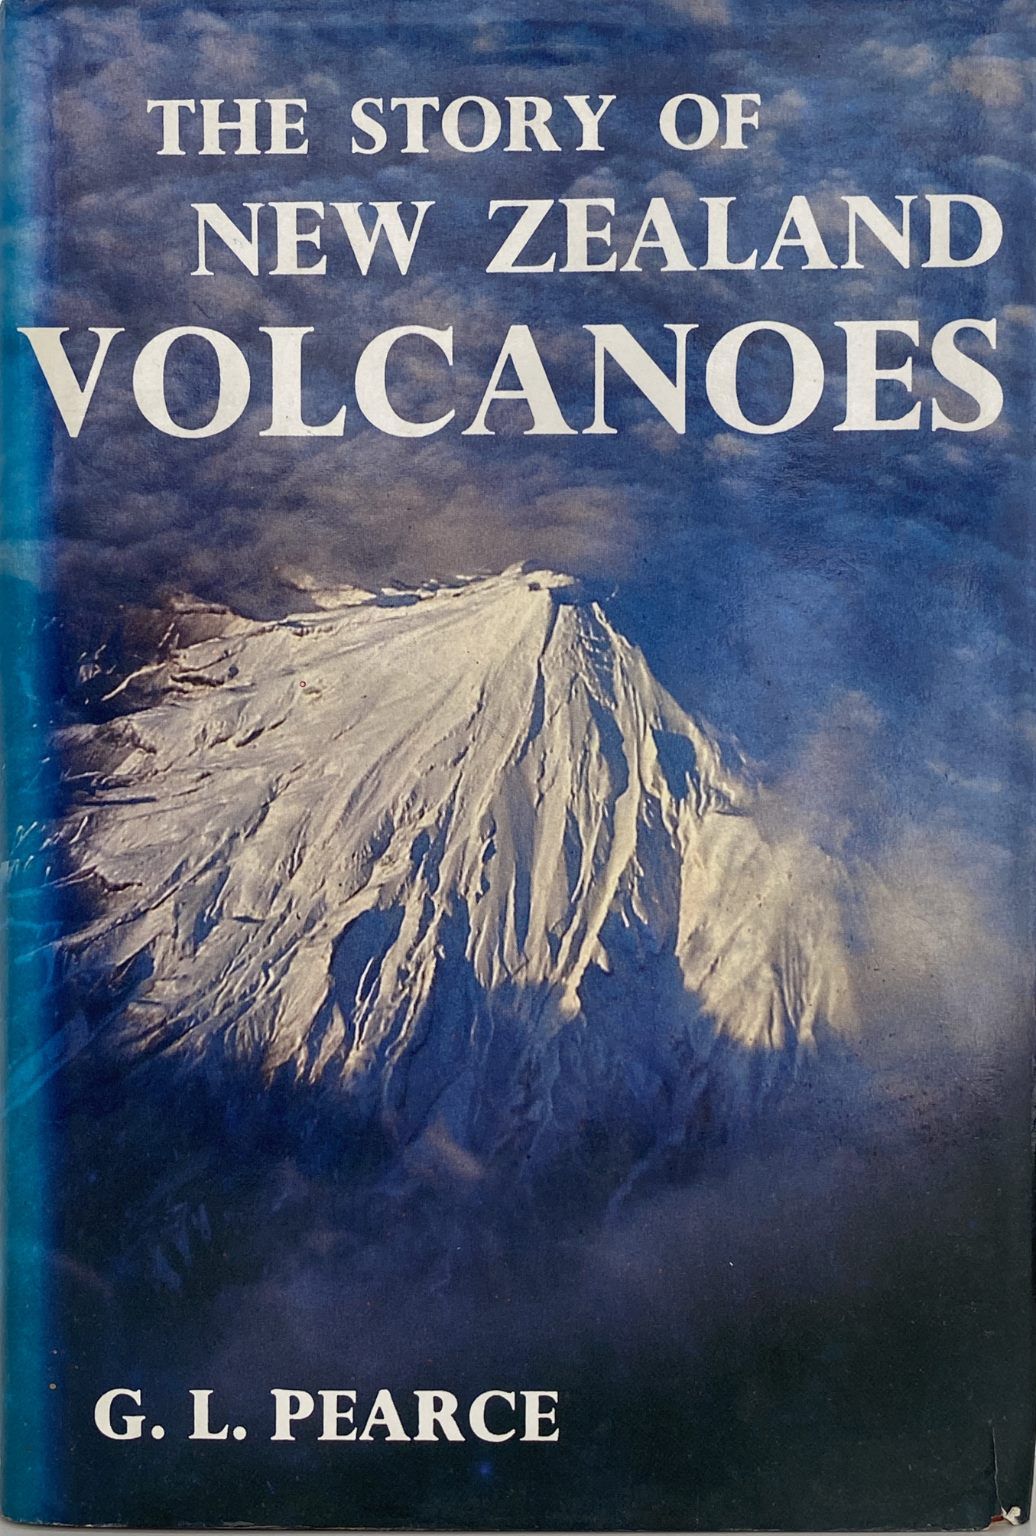 THE STORY OF NEW ZEALAND VOLCANOES